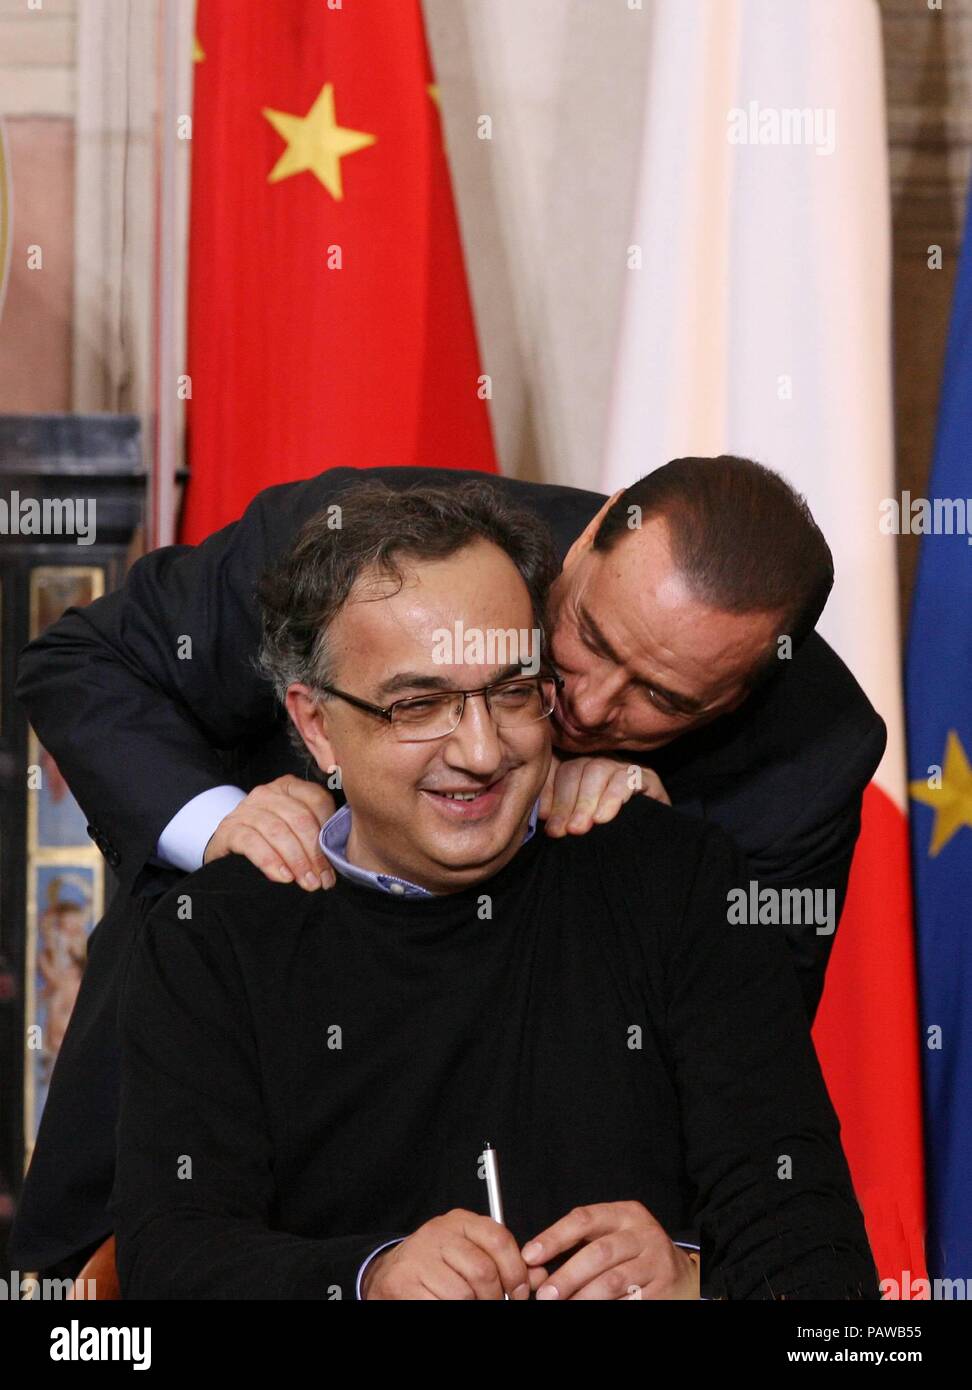 MEETING BETWEEN THE PRESIDENT OF THE COUNCIL AND THE PRESIDENT OF THE CHINESE REPUBLIC, IN THE PHOTO SILVIO BERLUSCONI AND SERGIO MARCHIONNE (Mario Maci, ROME - 2009-07-06) ps the photo can be used respecting the context in which it was taken, and without the defamatory intent of the people represented (Mario Maci, Foto Repertorio - 2018-07-25) ps the photo can be used respecting the context in which it was taken, and without the defamatory intent of the decoration of the people represented Stock Photo